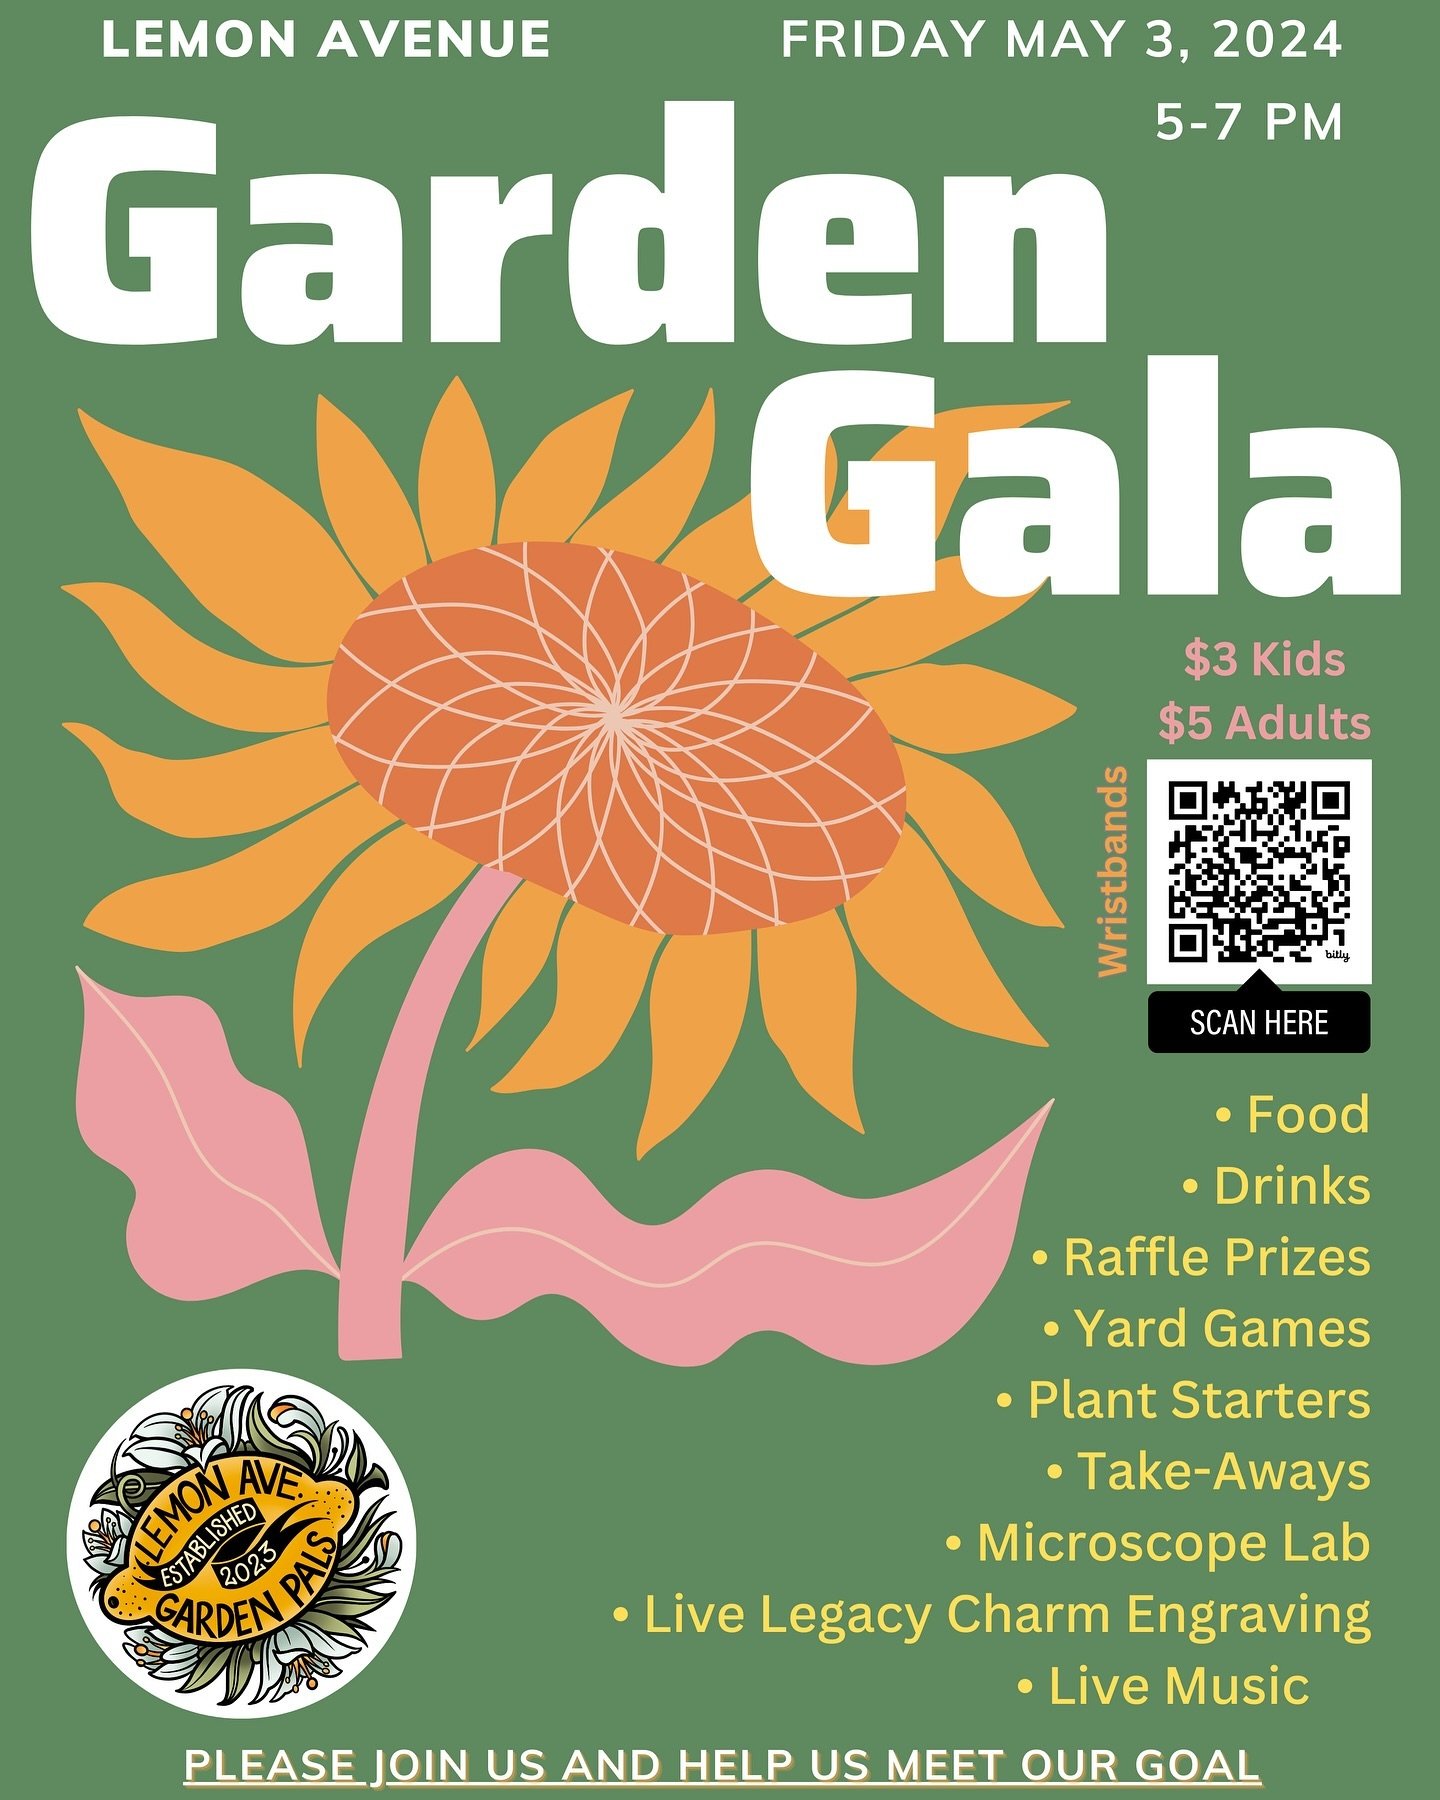 🌱 Come join us for our Spring Garden Gala Event 🎶 Friday May 3rd 5pm - 7pm 🎉 
Enjoy Ms. Angela&rsquo;s famous Indian Dal recipe. We will have live steel drum musician, lawn games, live legacy charm engraving, plant starters, a microscope lab, take